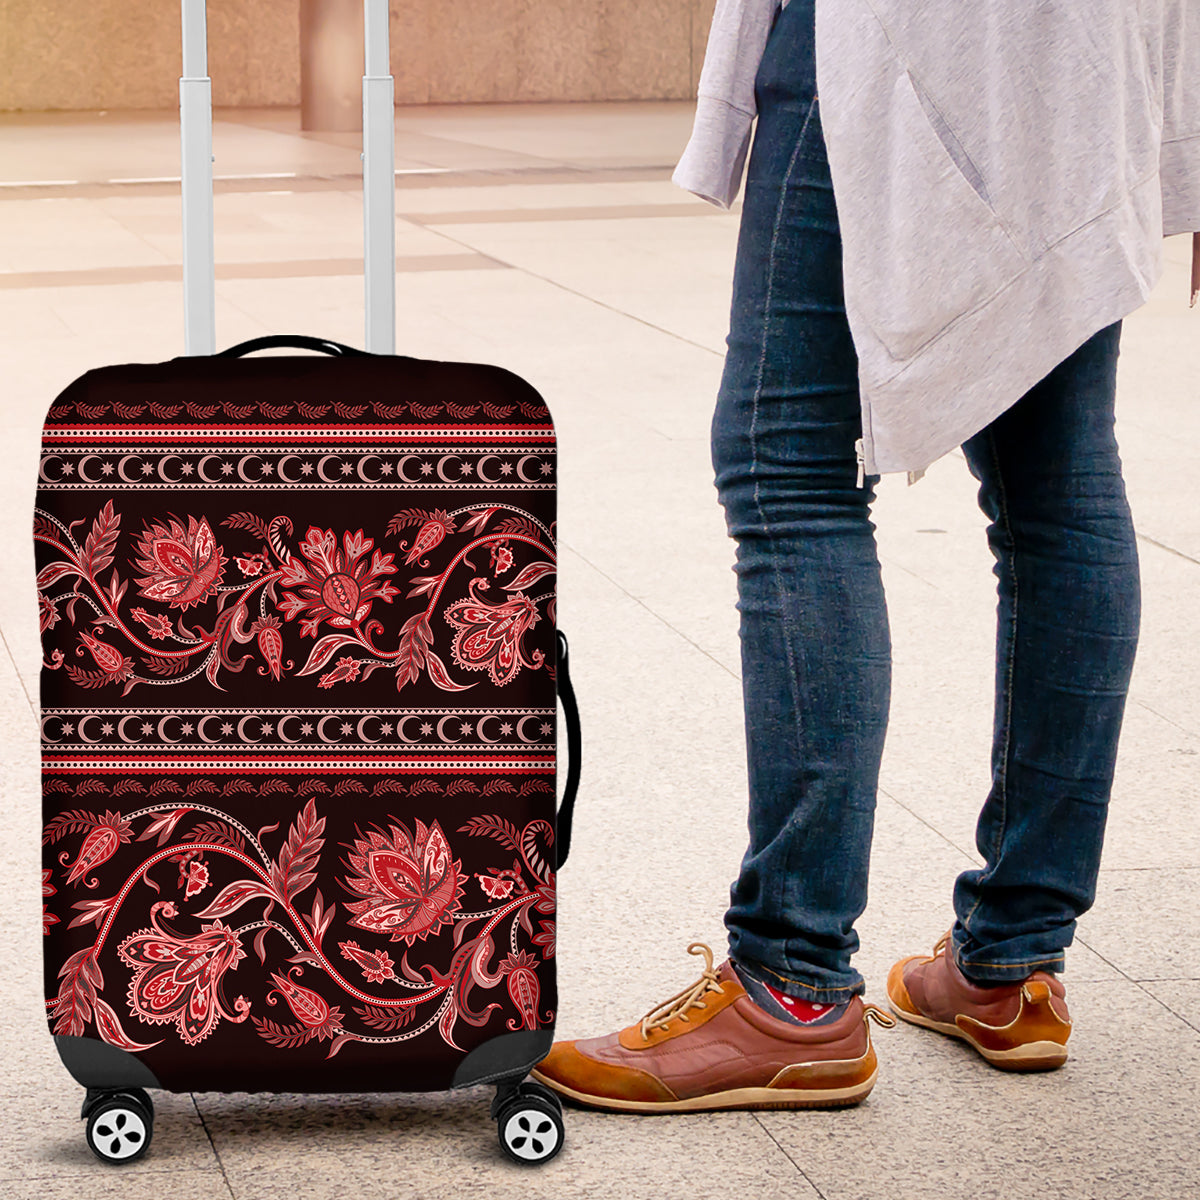 azerbaijan-luggage-cover-traditional-pattern-ornament-with-flowers-buta-red